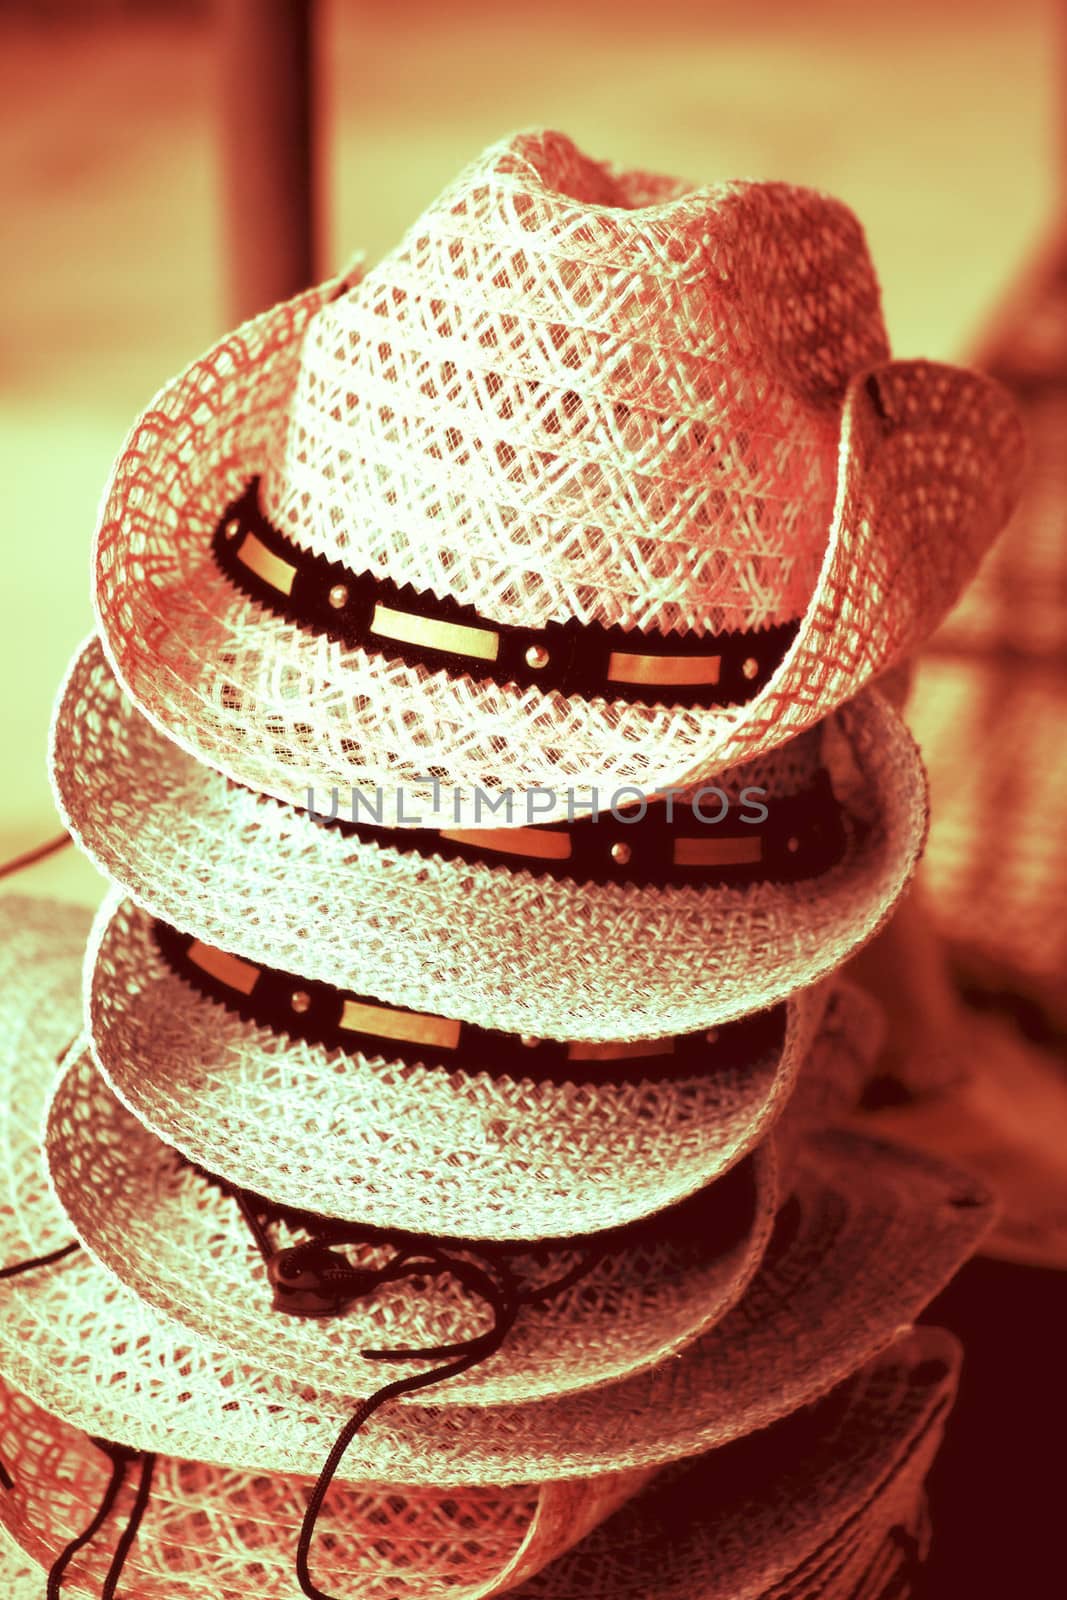 Handmade hat made from grass, Vintage Style  by jame_j@homail.com